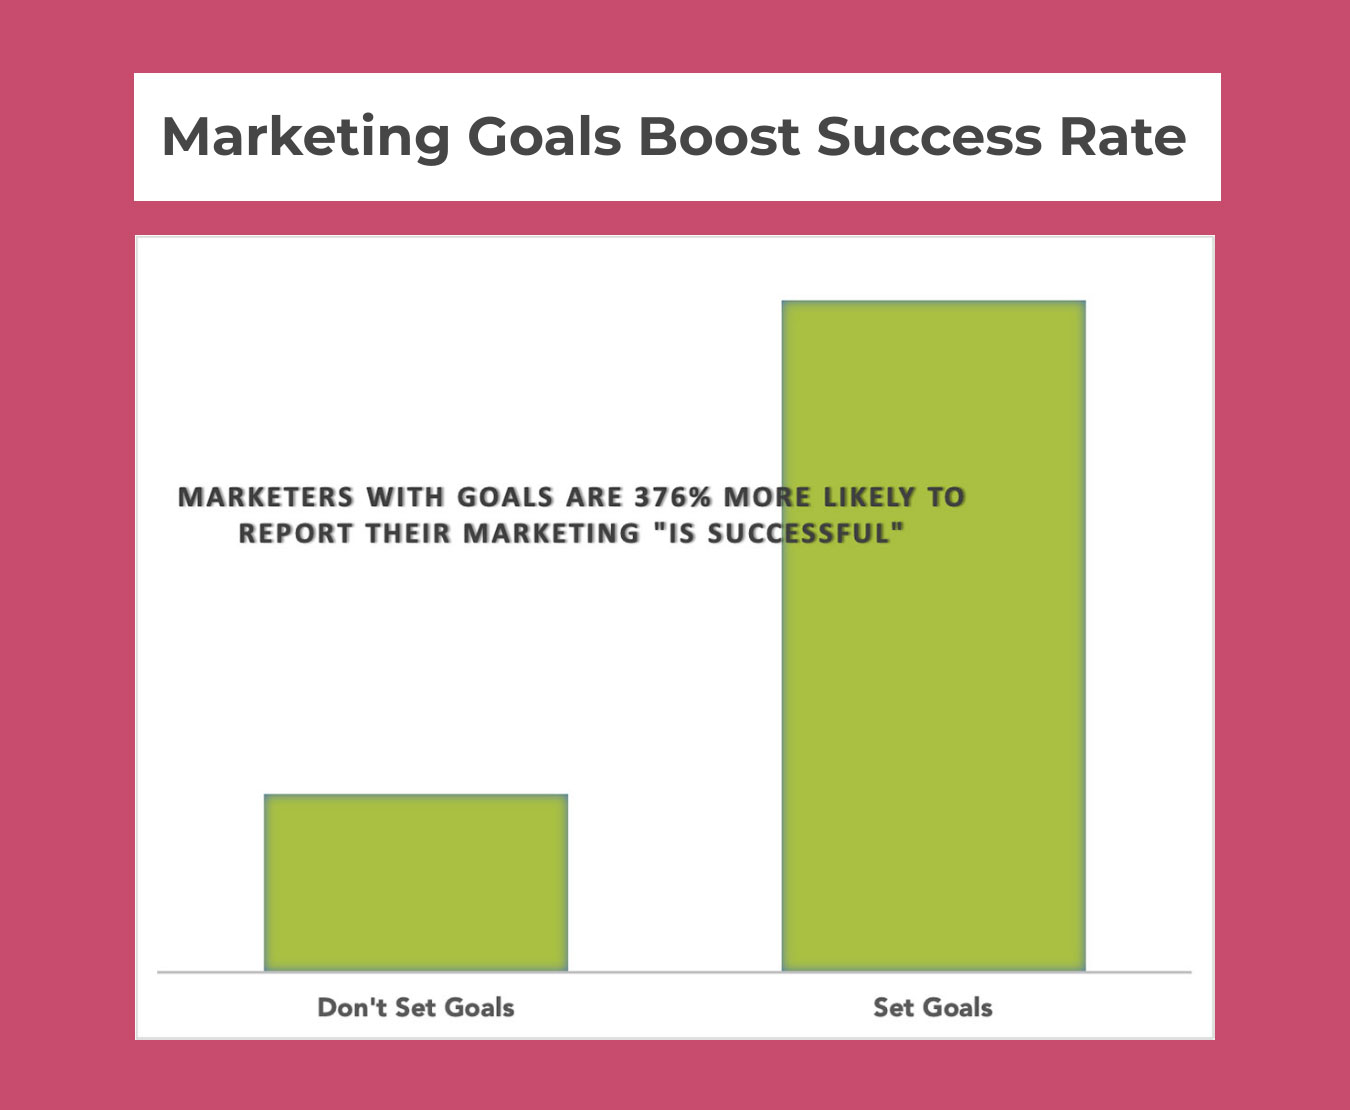 Manufacturing Marketing Channel Strategies - goal-setting marketers are 376% more likely to report that their marketing “is successful” compared to marketers who don’t set goals